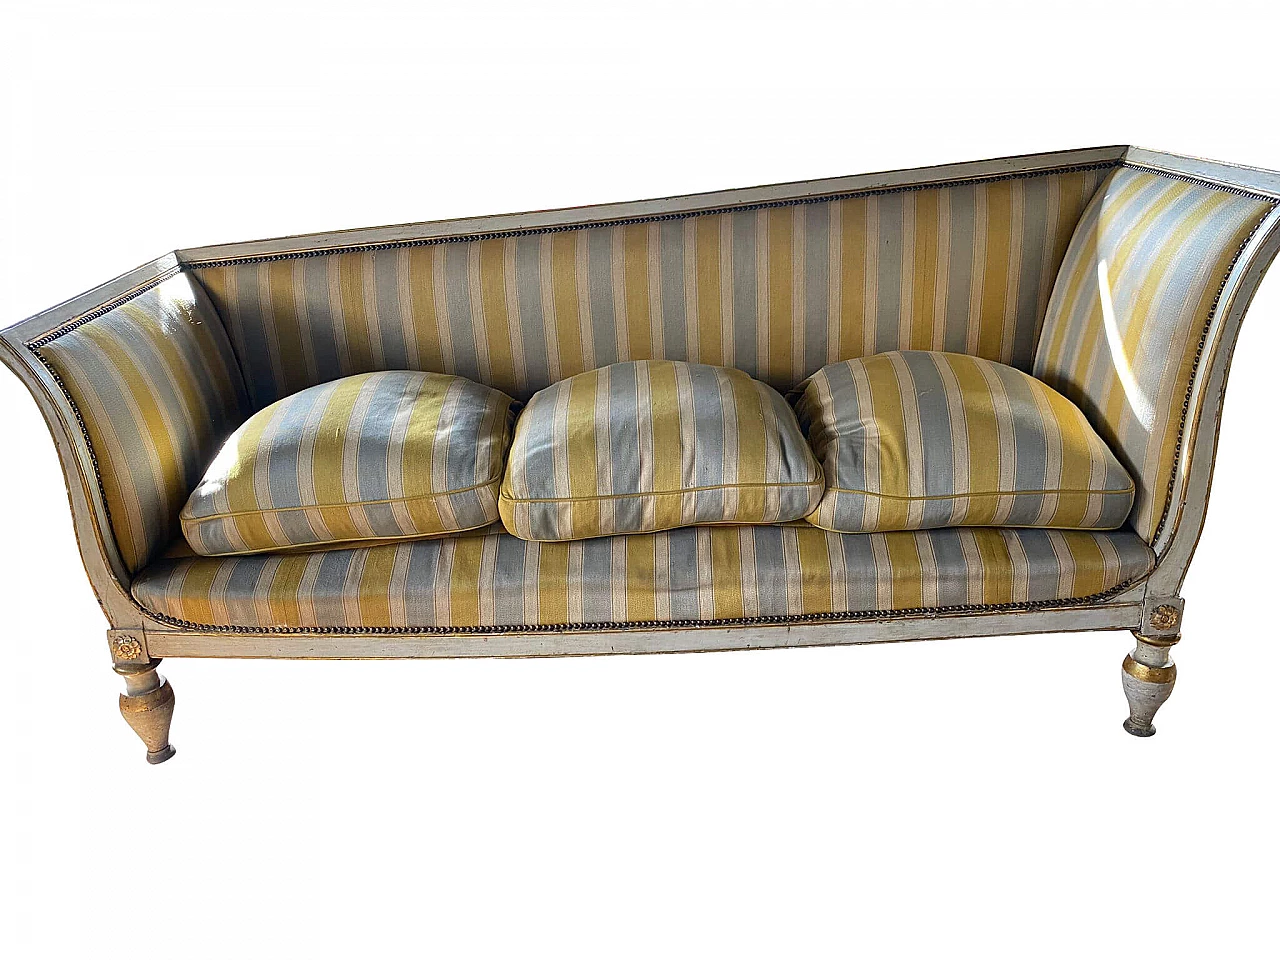 Lucchese asymmetrical boat sofa with striped silk, 1930s 1332252